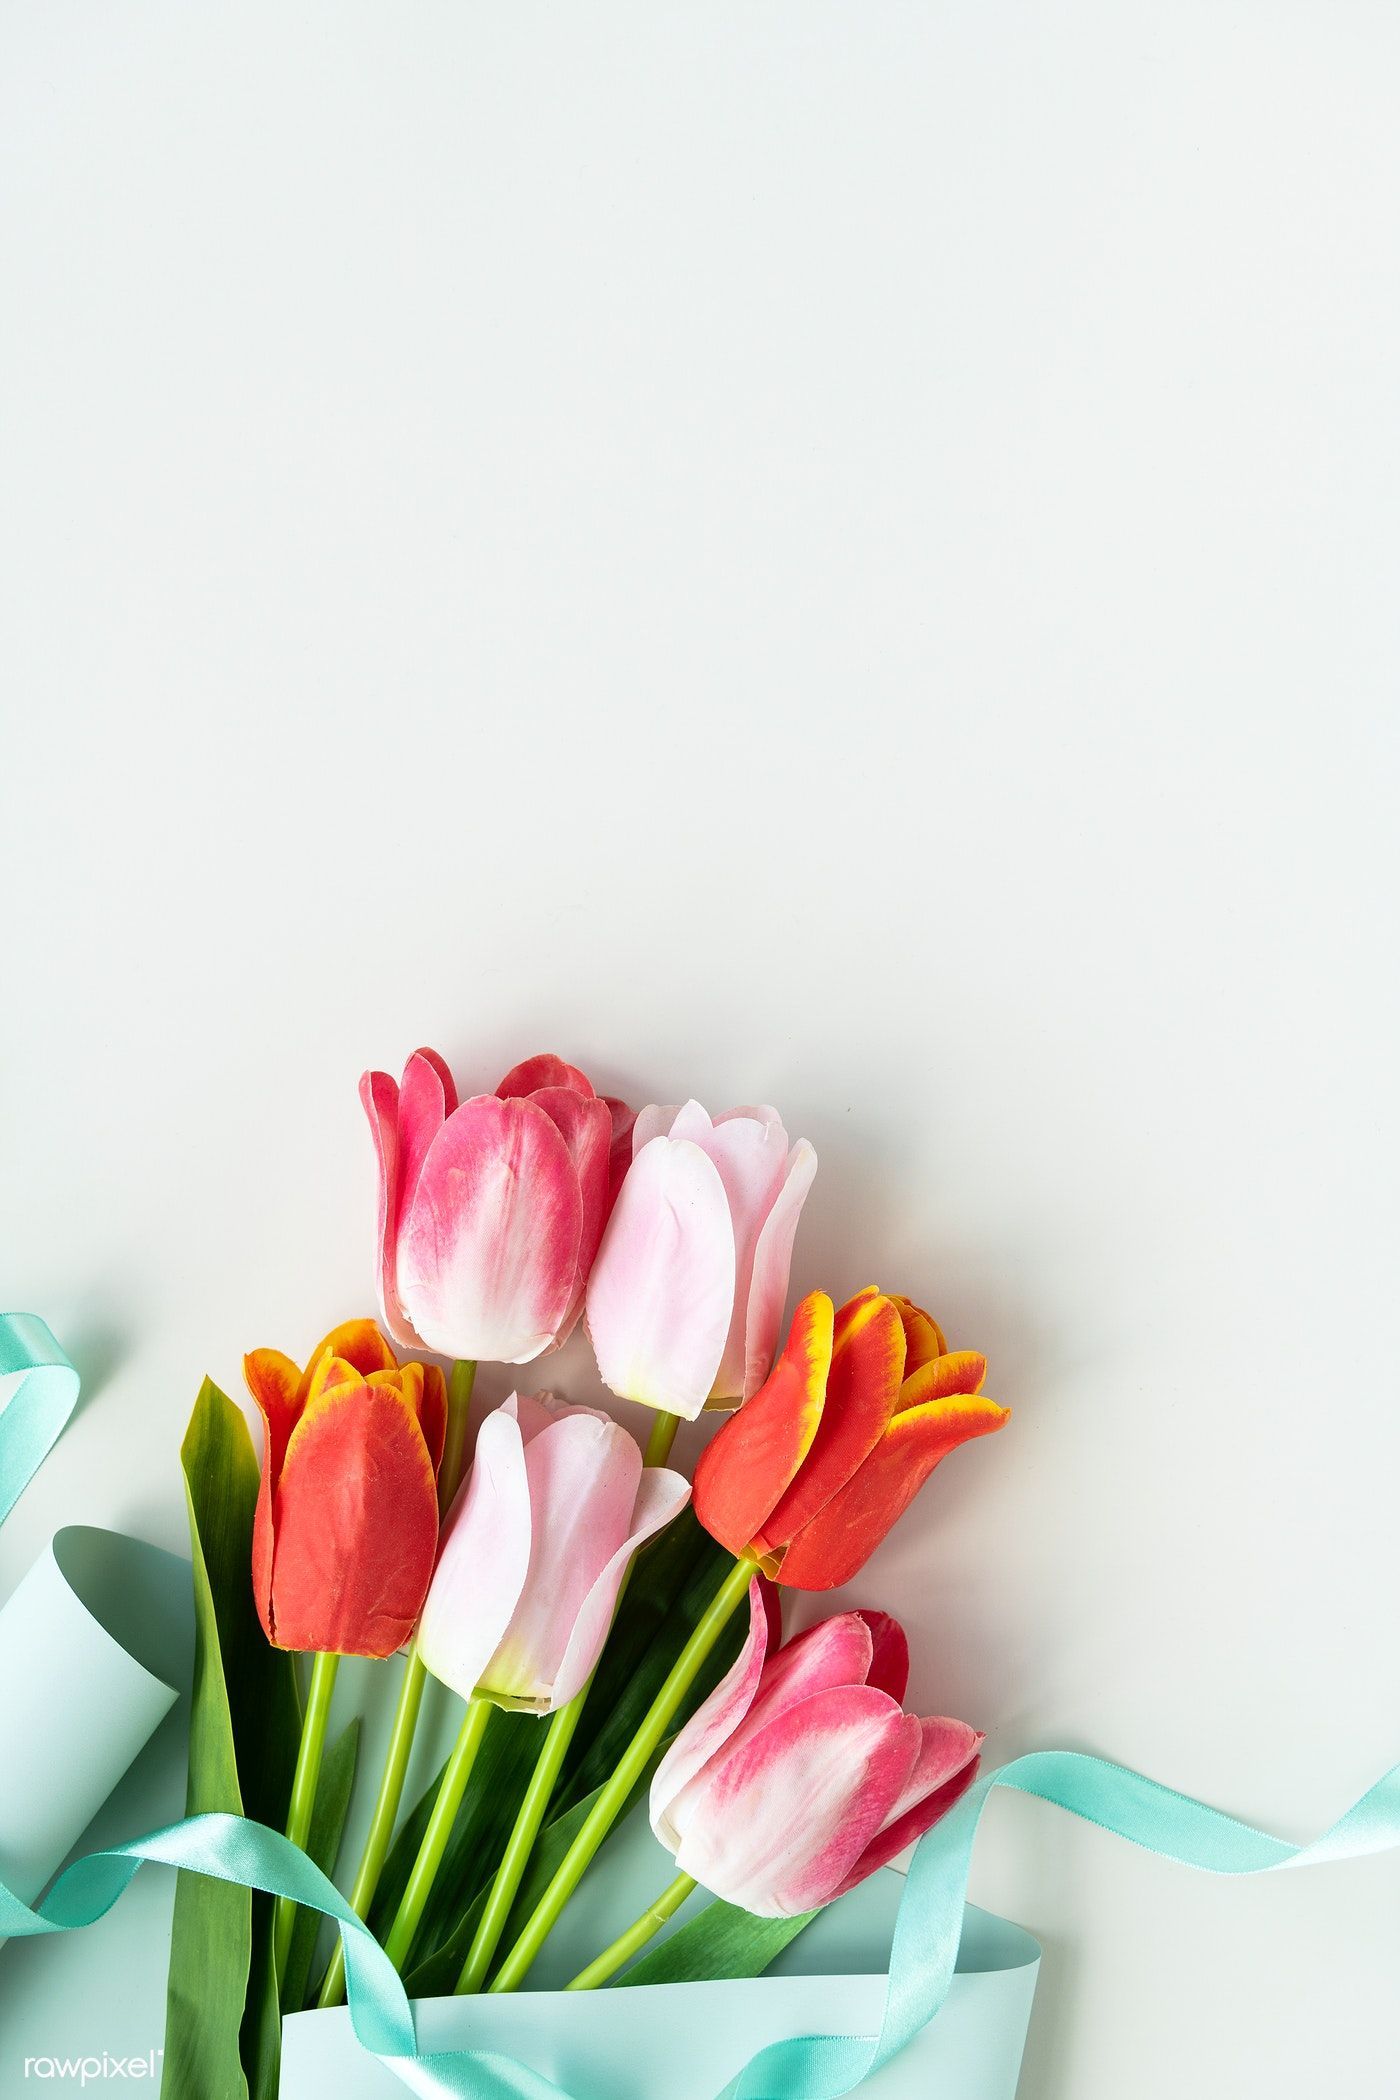 Download premium image of Pink and orange tulips on blank white background. Blank white background, Orange tulips, Flower background